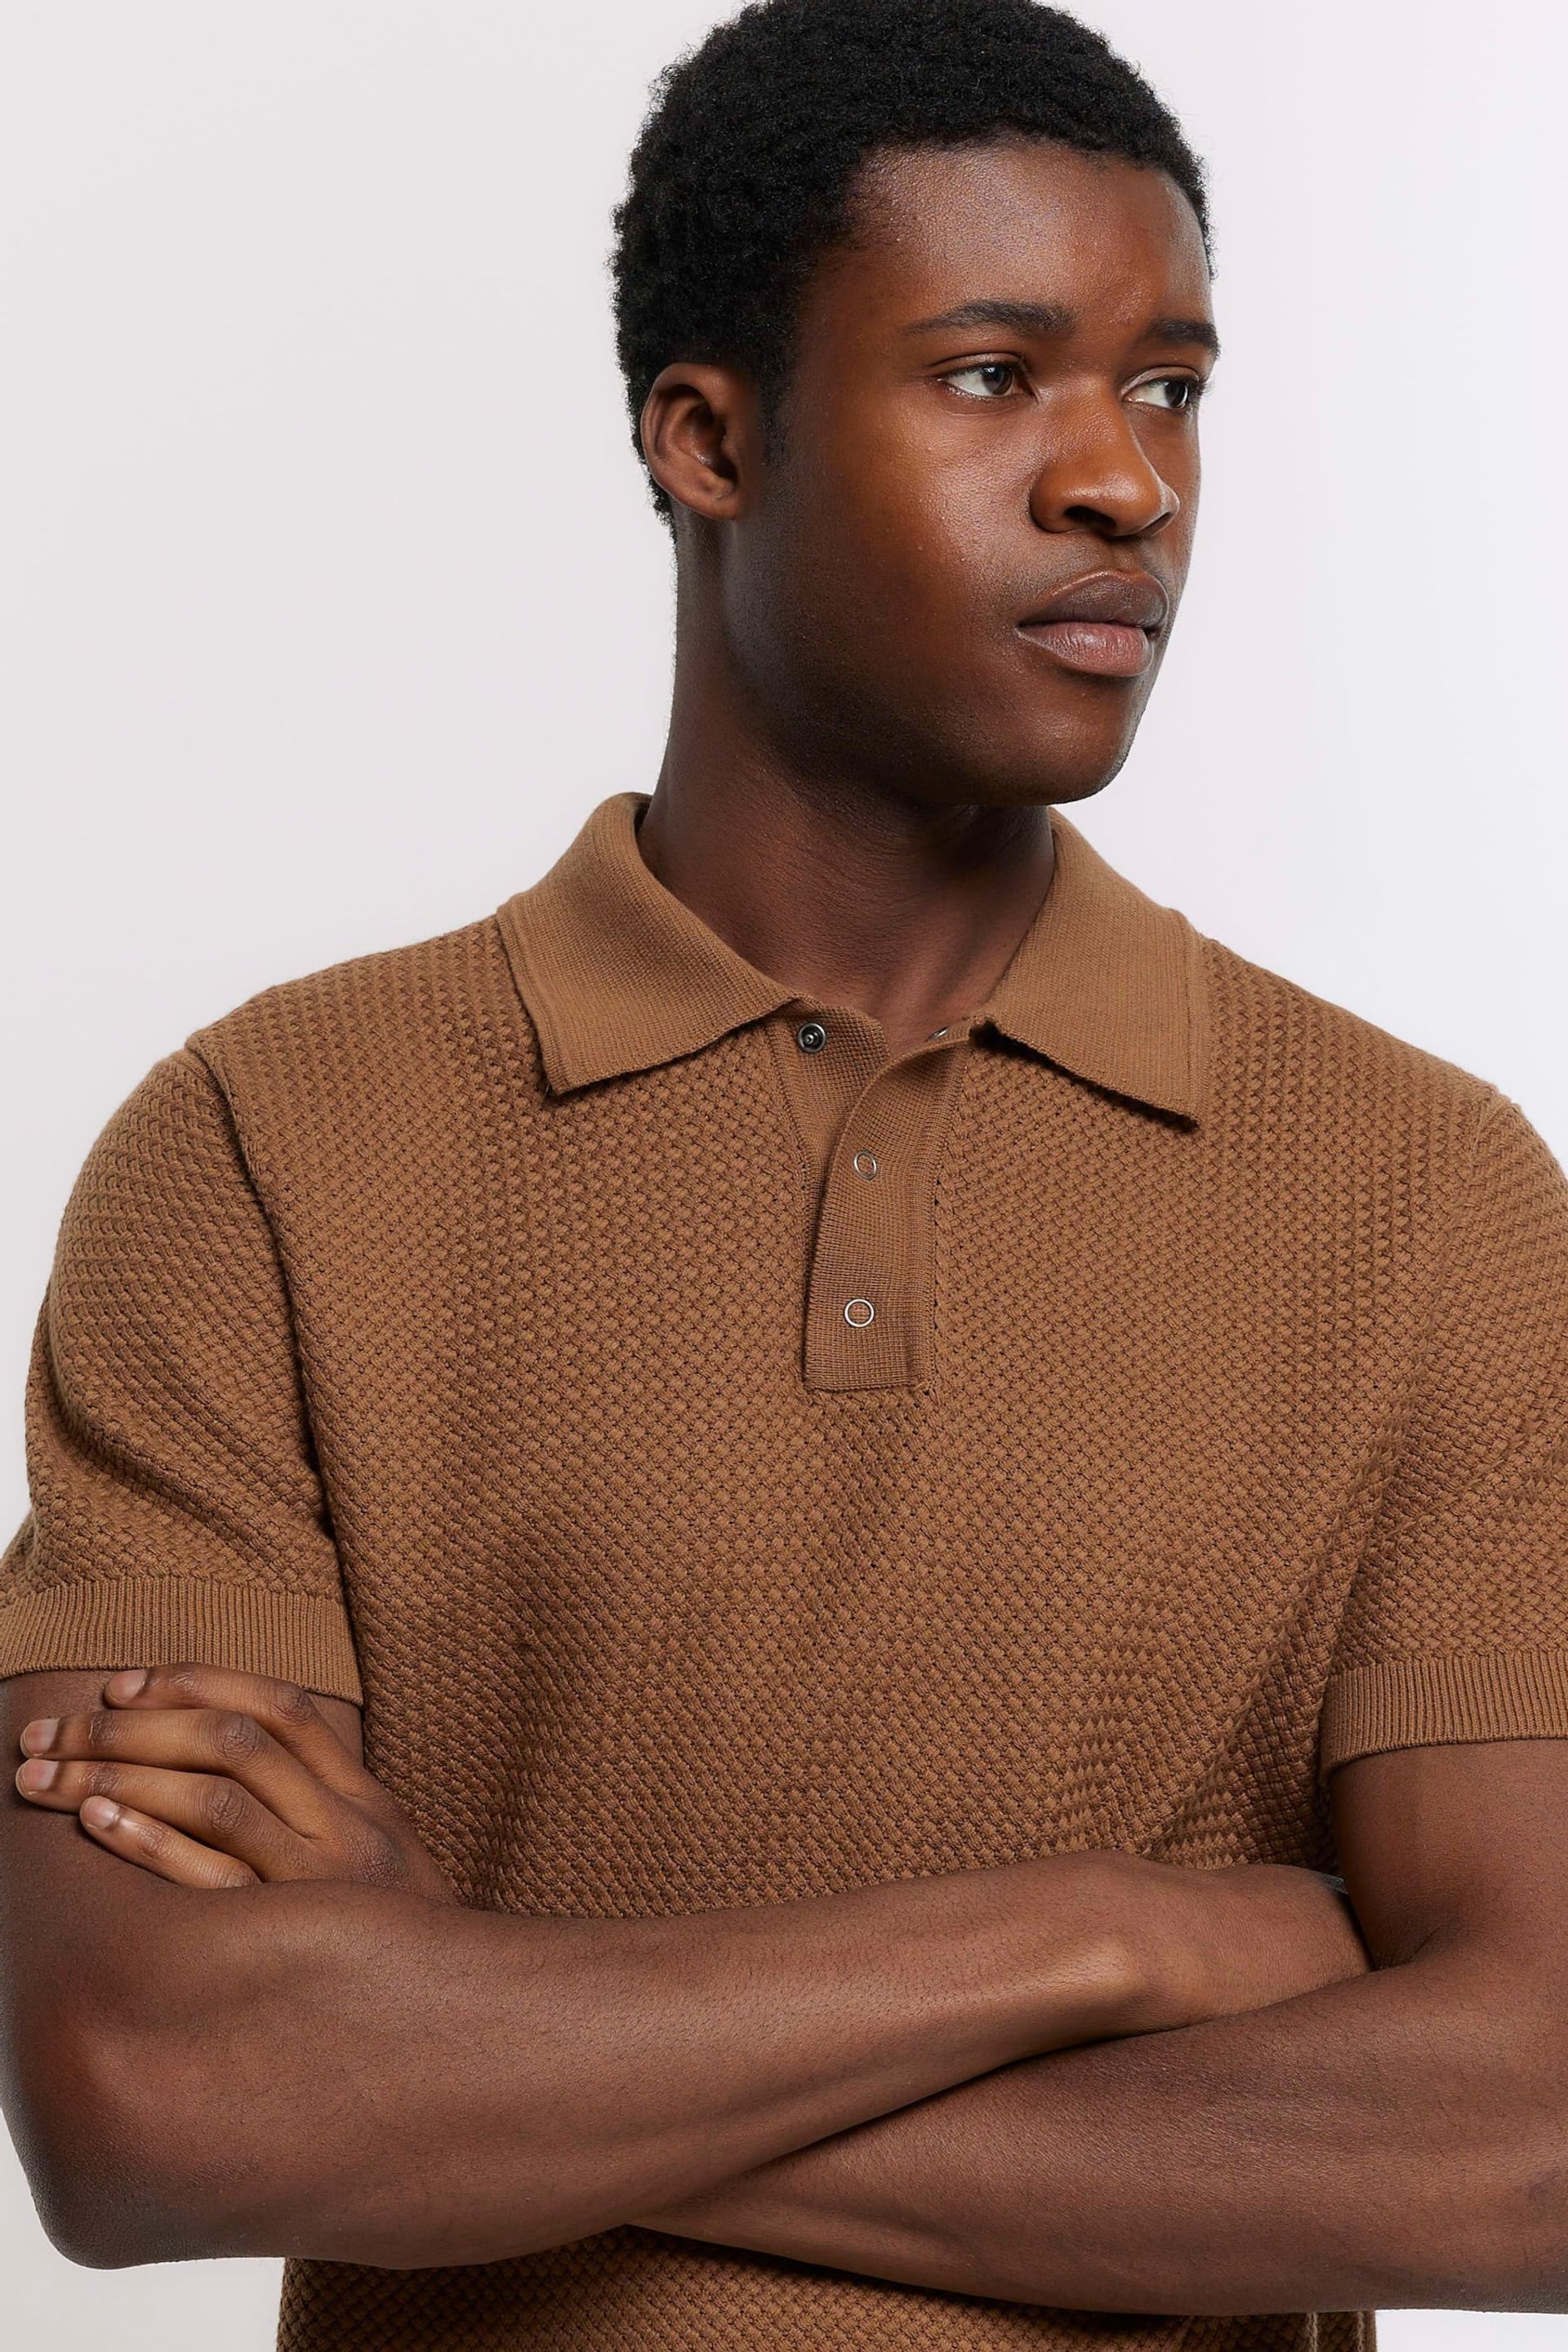 River Island Brown Textured Knitted Polo Shirt - Image 3 of 4